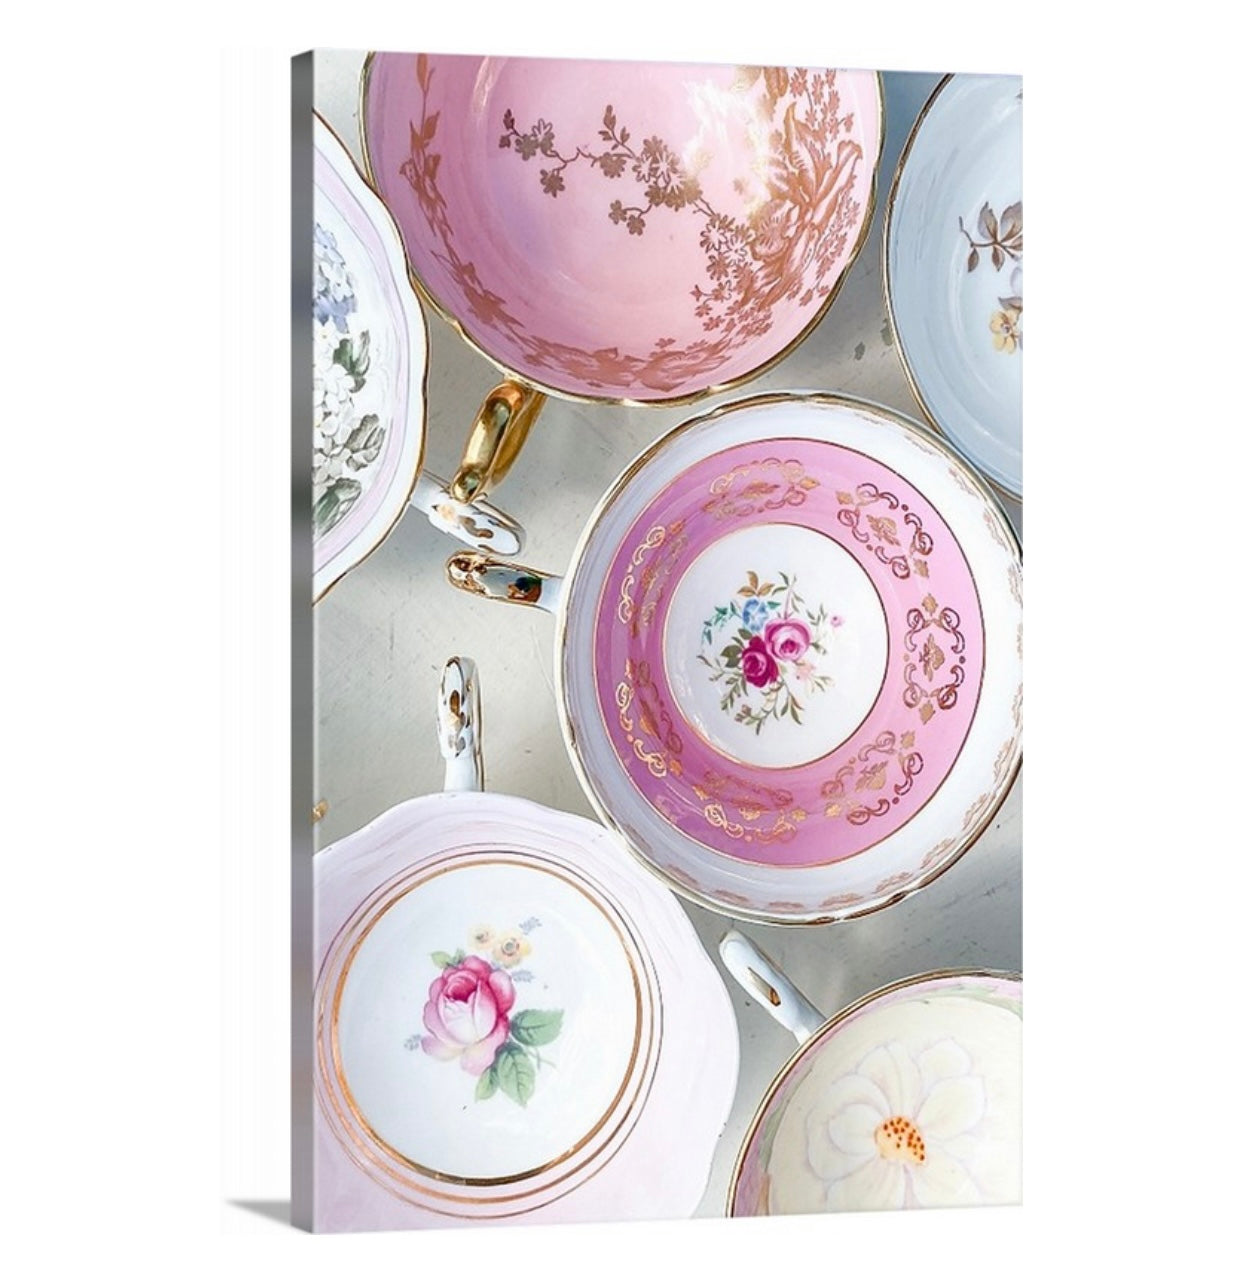 Vintage English Teacups Gallery Wrapped Canvas